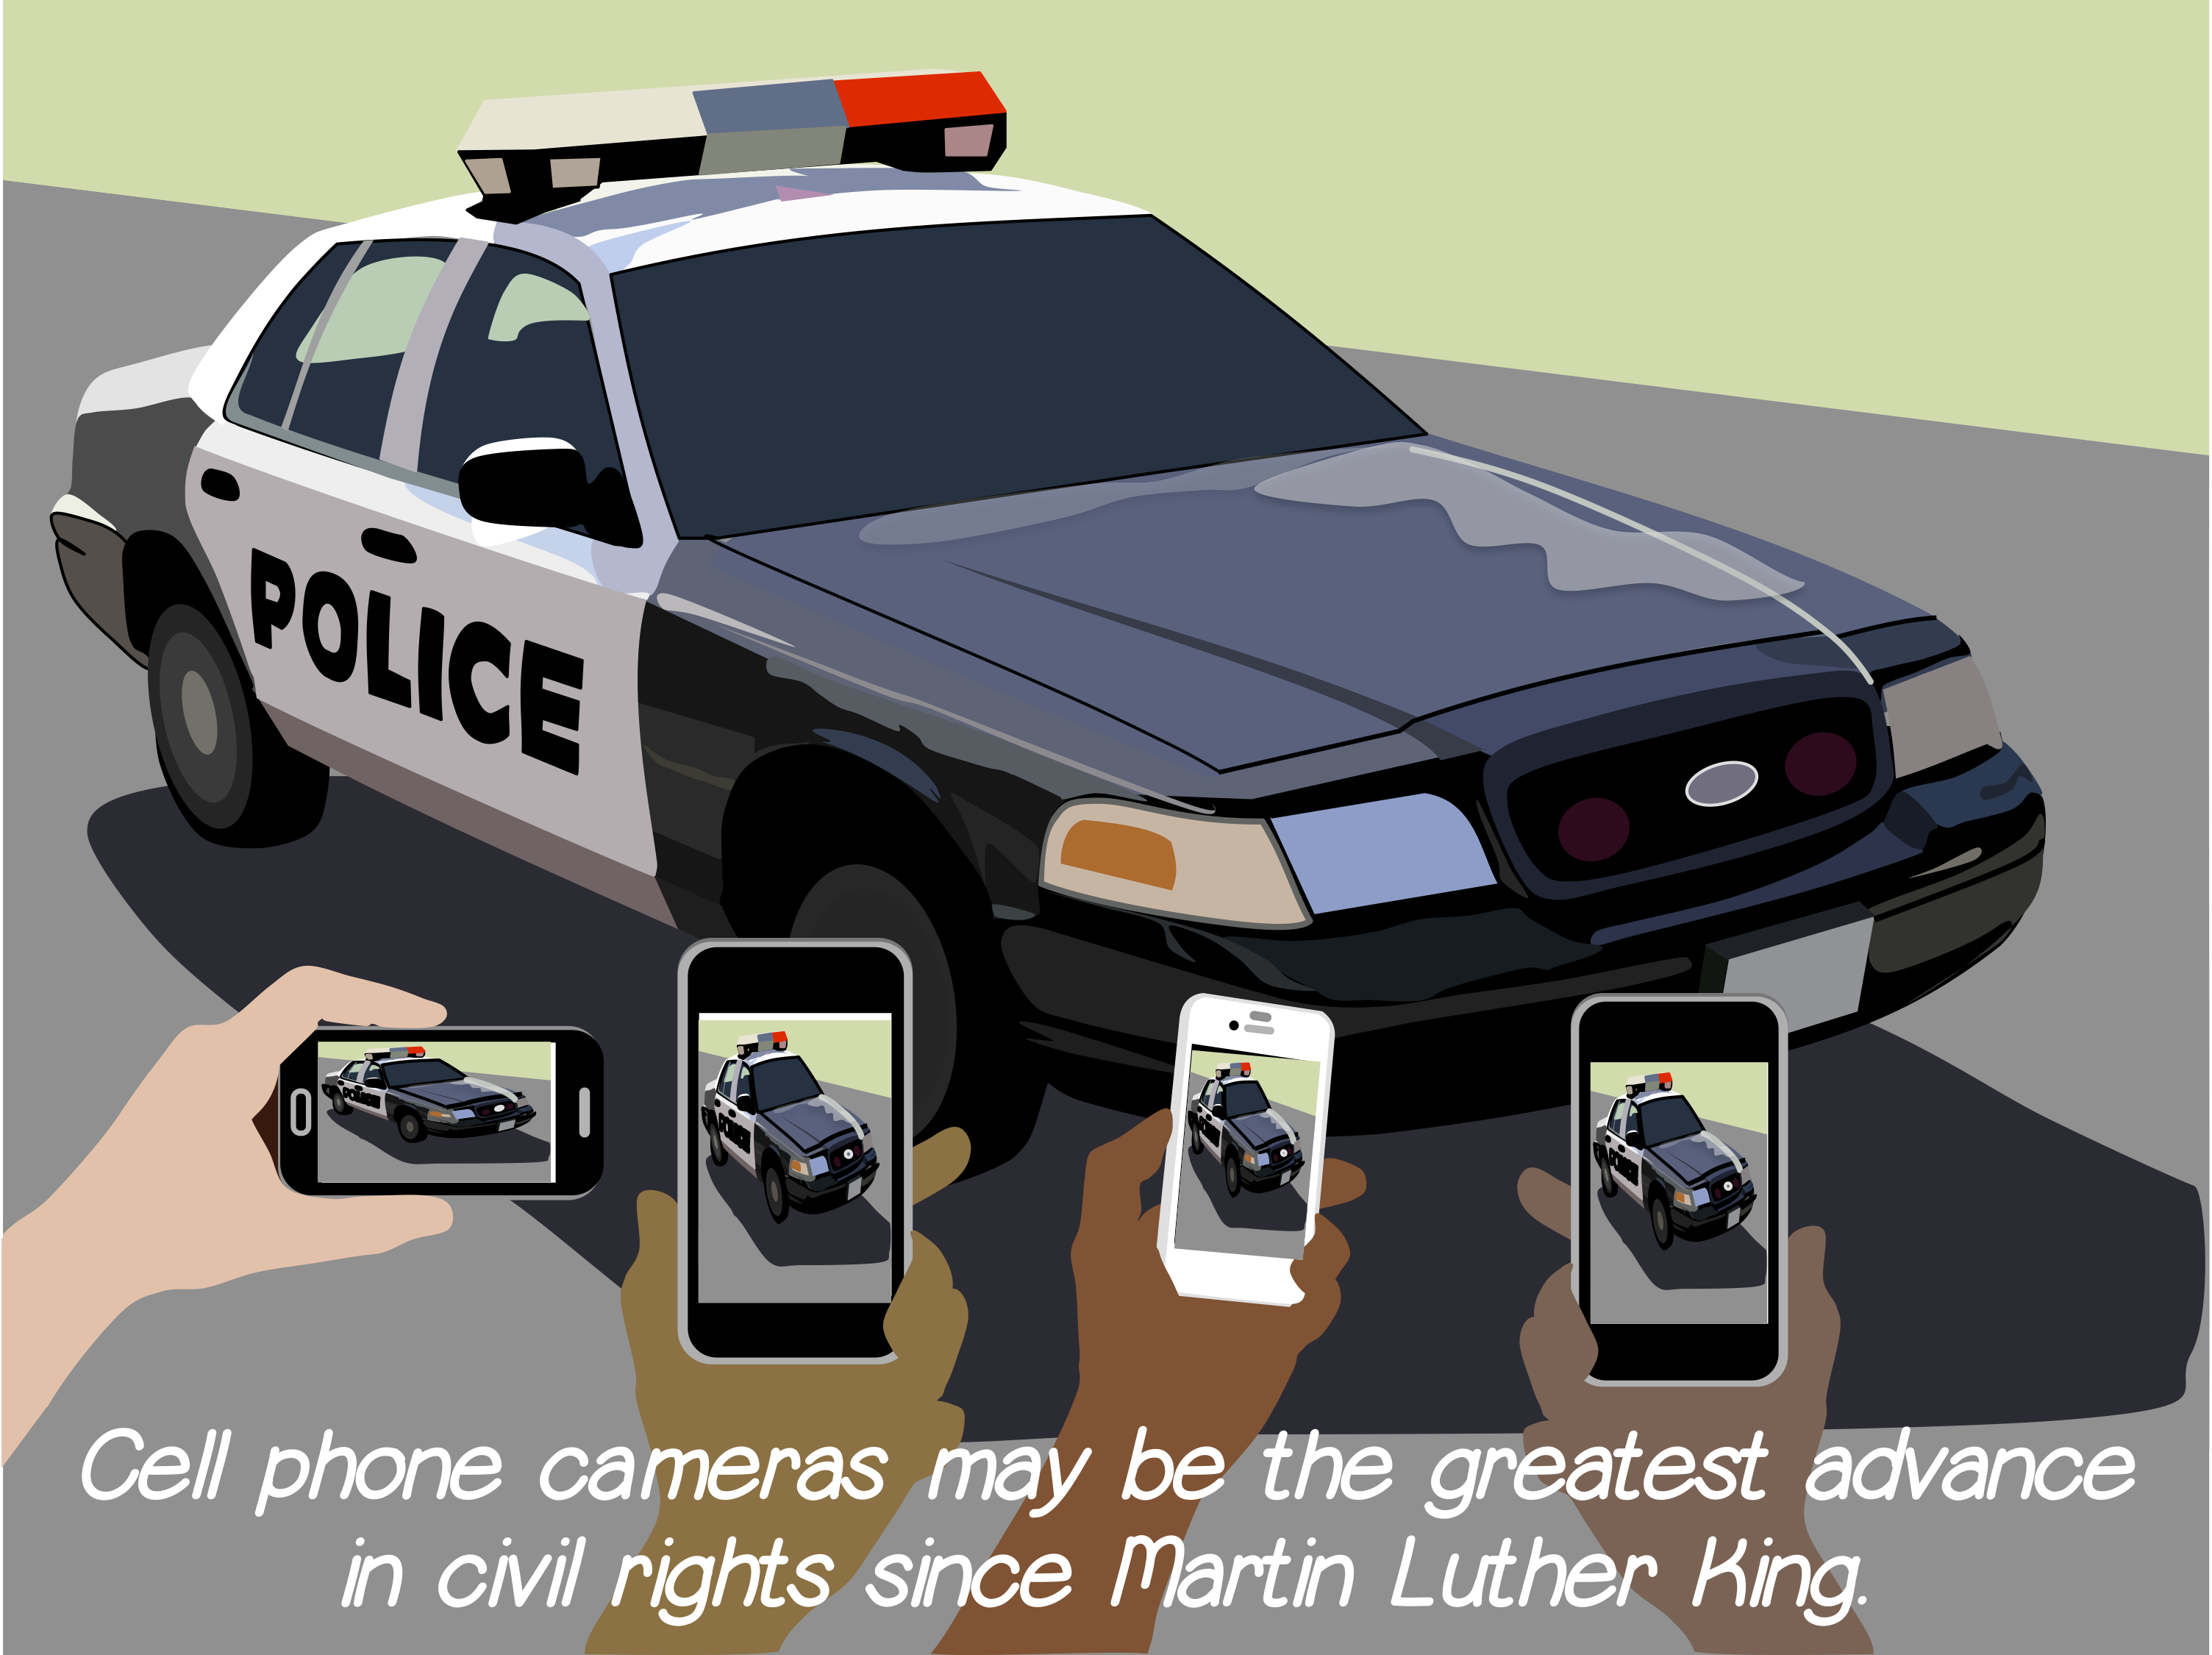 Cell phone cameras may be the greatest advancement in civil rights since Martin Luther King